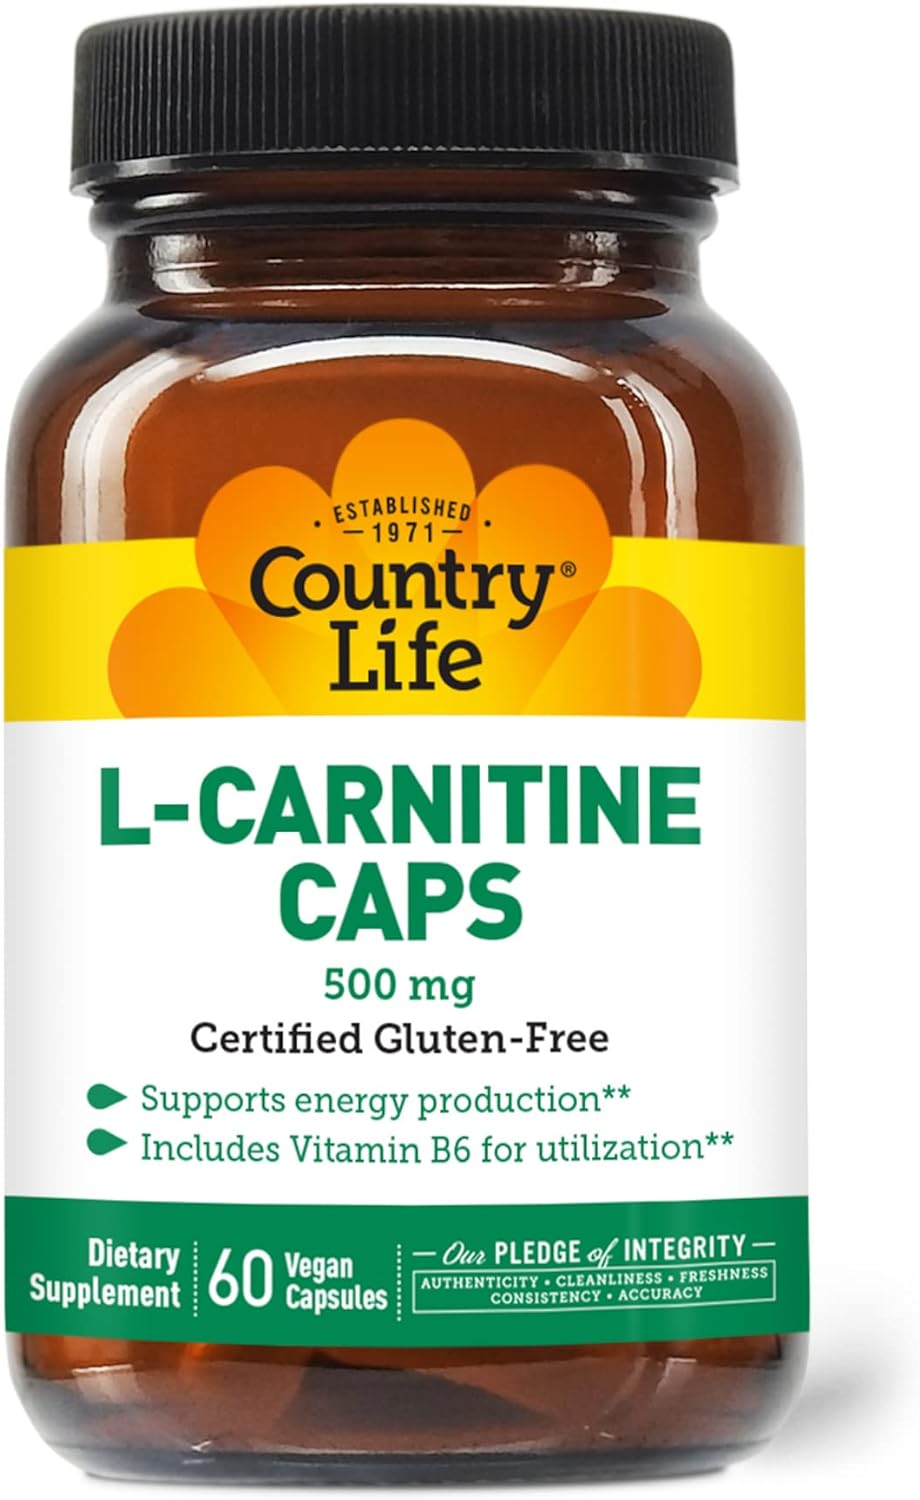 Country Life L-Carnitine Caps 500mg, 60 Capsules, Certified Gluten-Fre